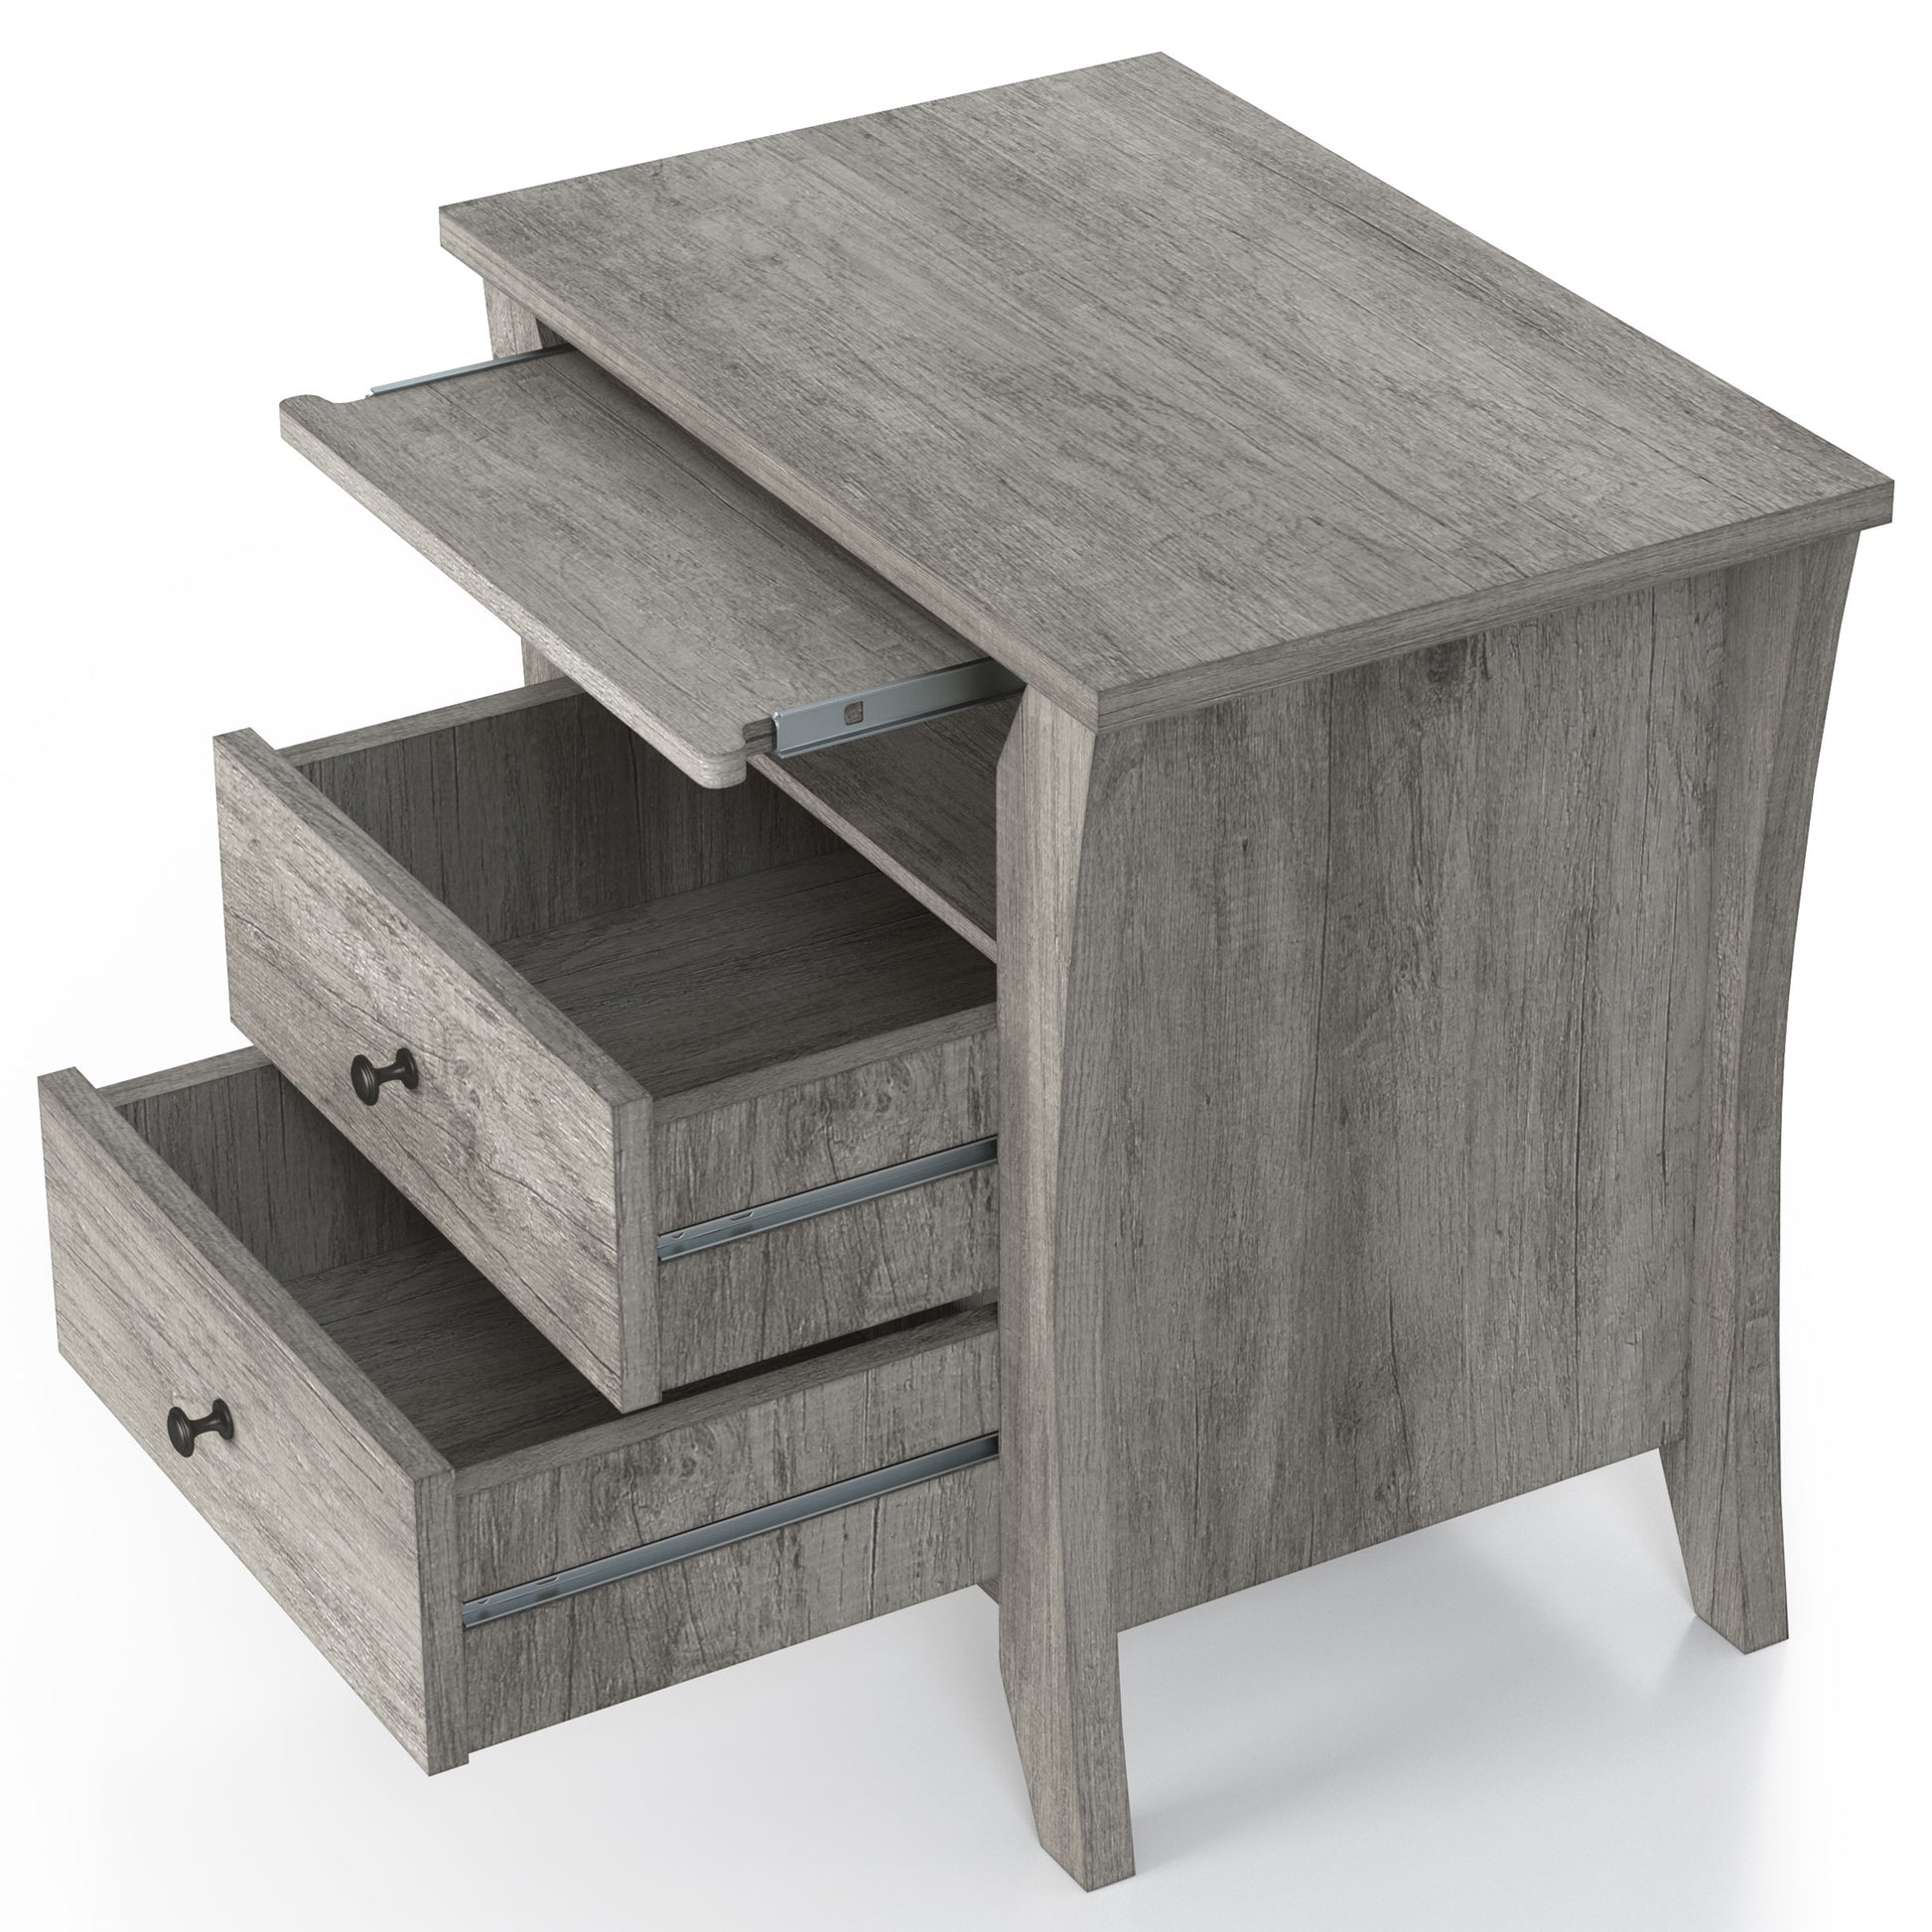 Left angled transitional vintage gray oak two-drawer one-shelf nightstand with tray extended and drawers open on a white background